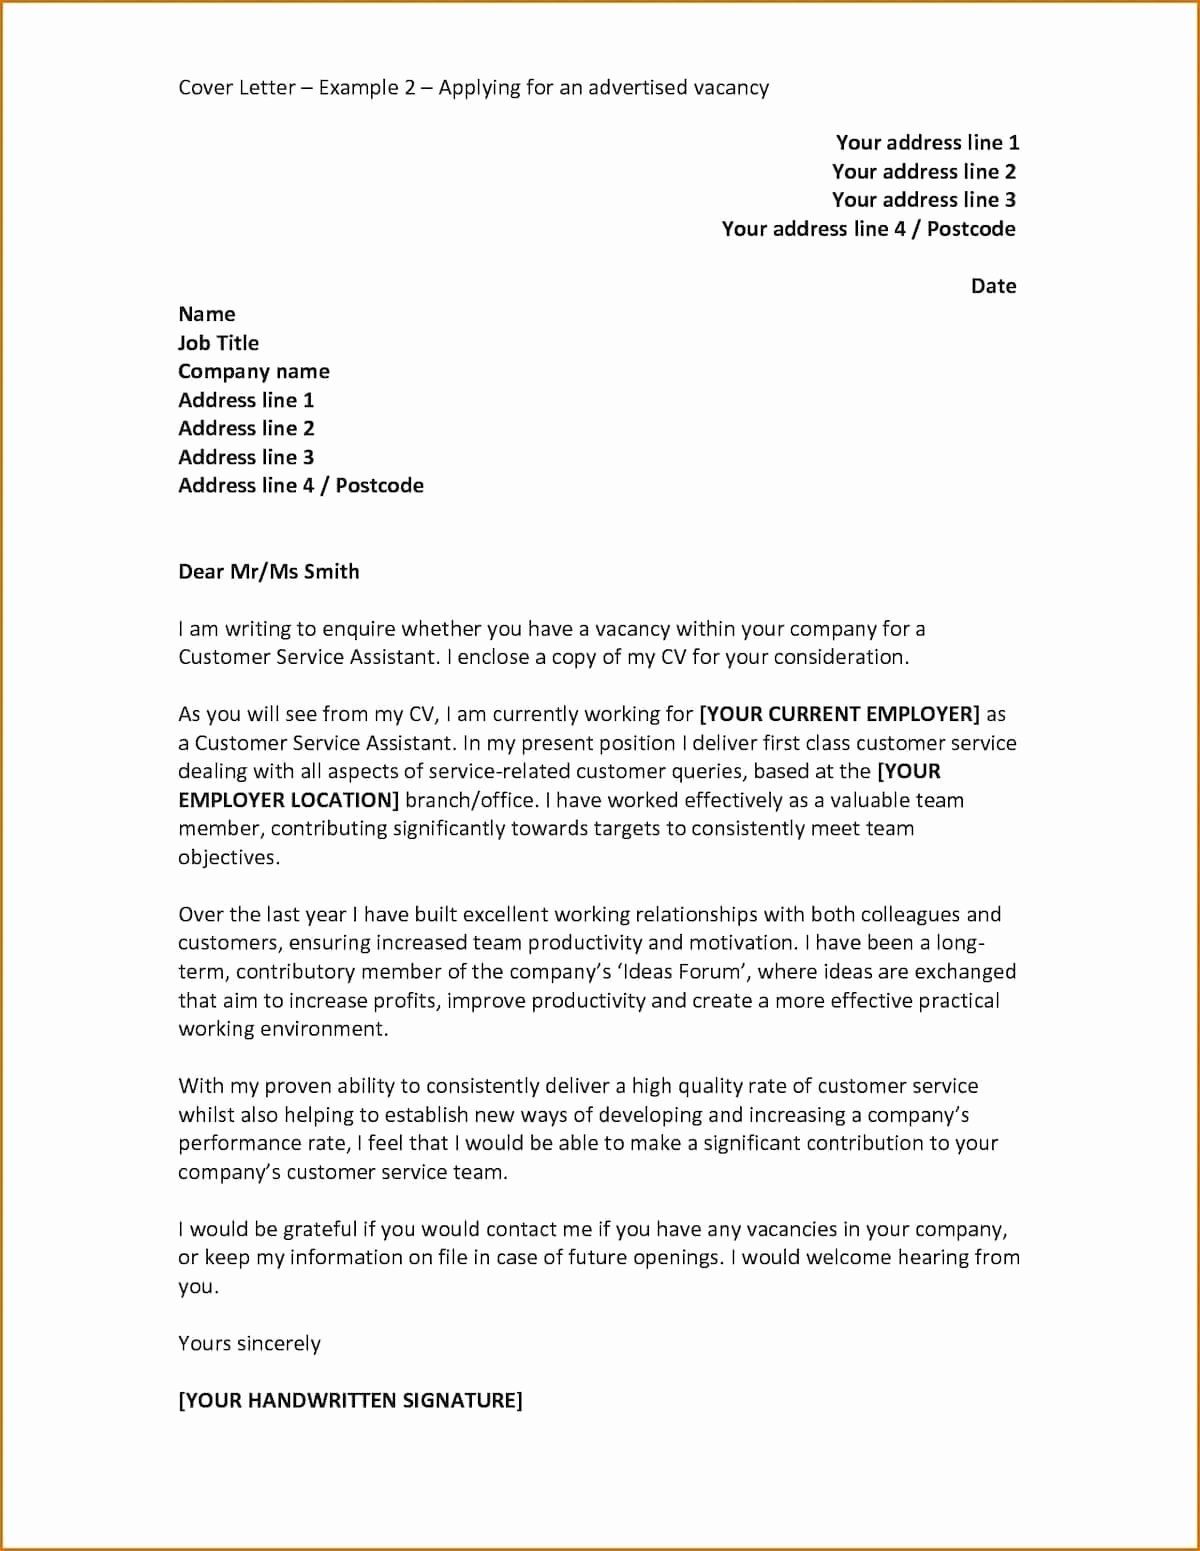 Draft Of An Application Letter